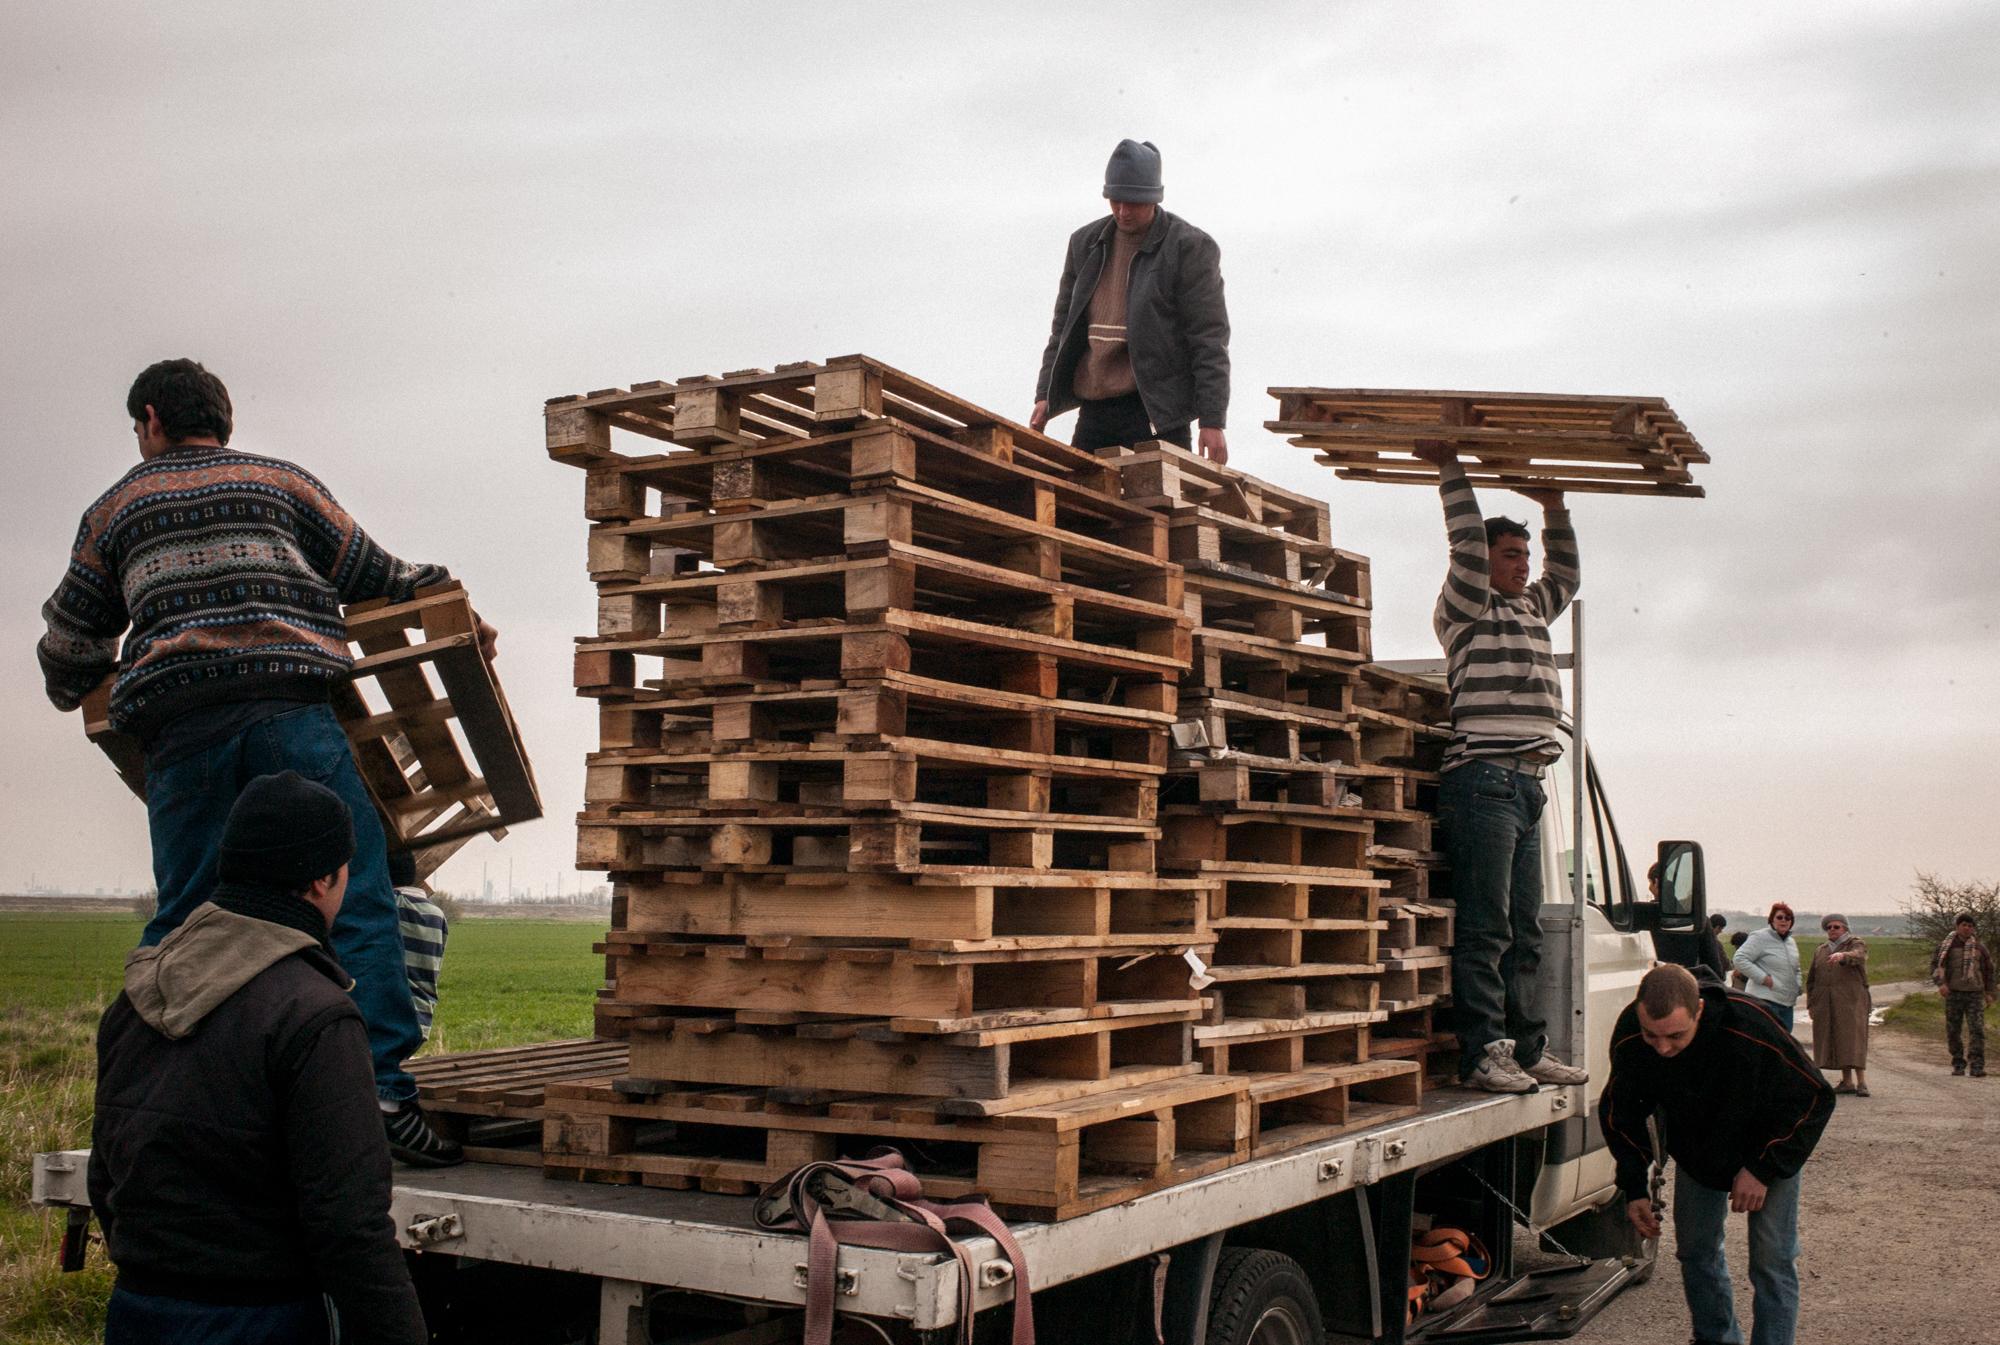 Kurdish and Afghan immigrants receive weekly wood supply from Emmaus, the French national charity...